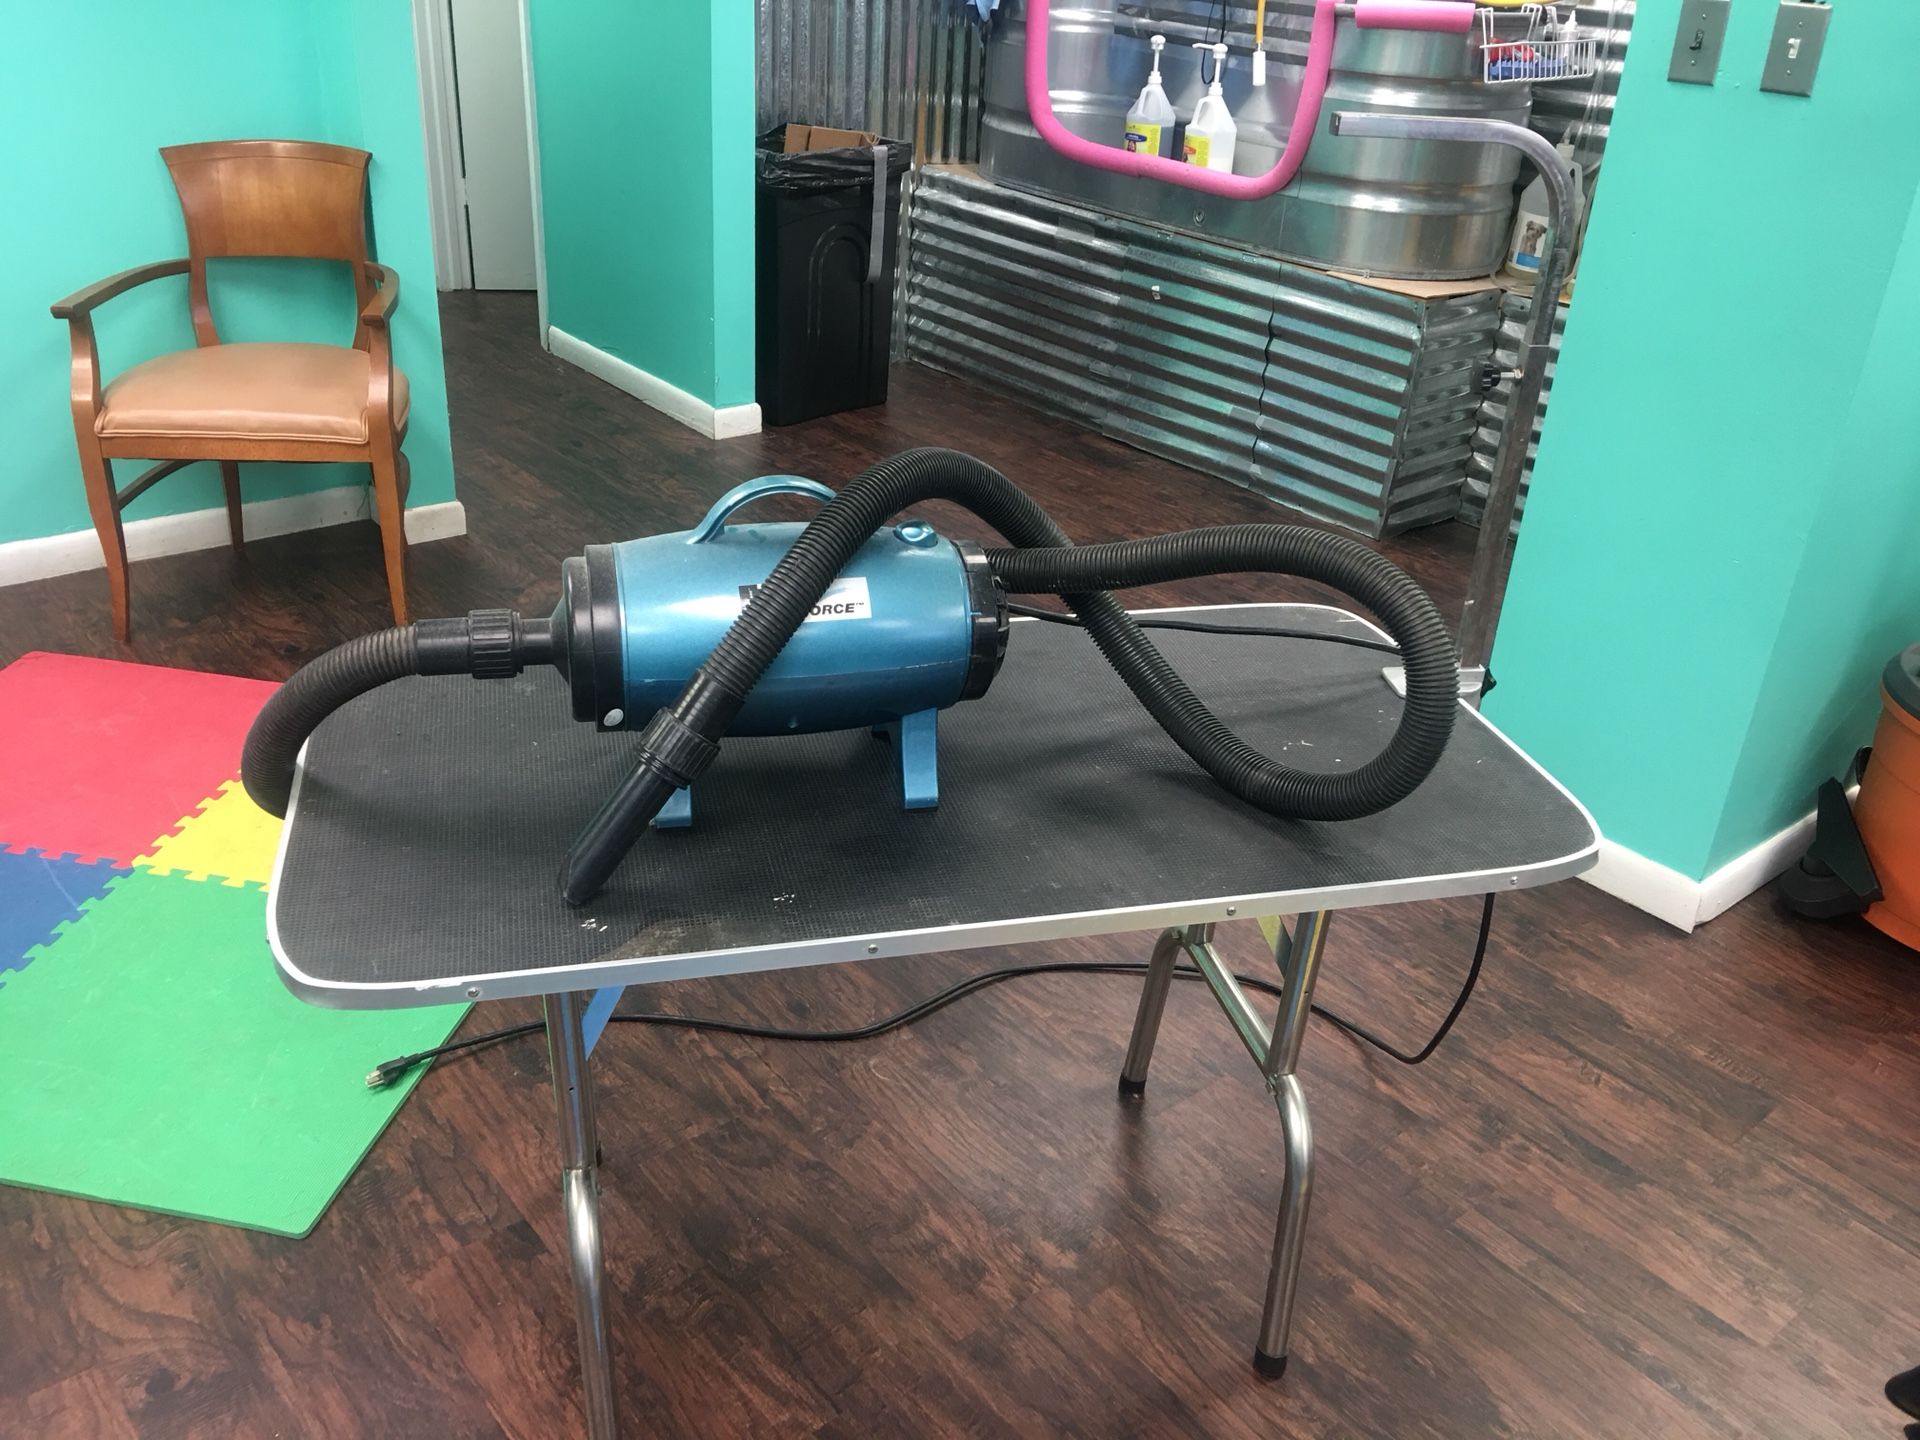 Grooming table/ force dryer